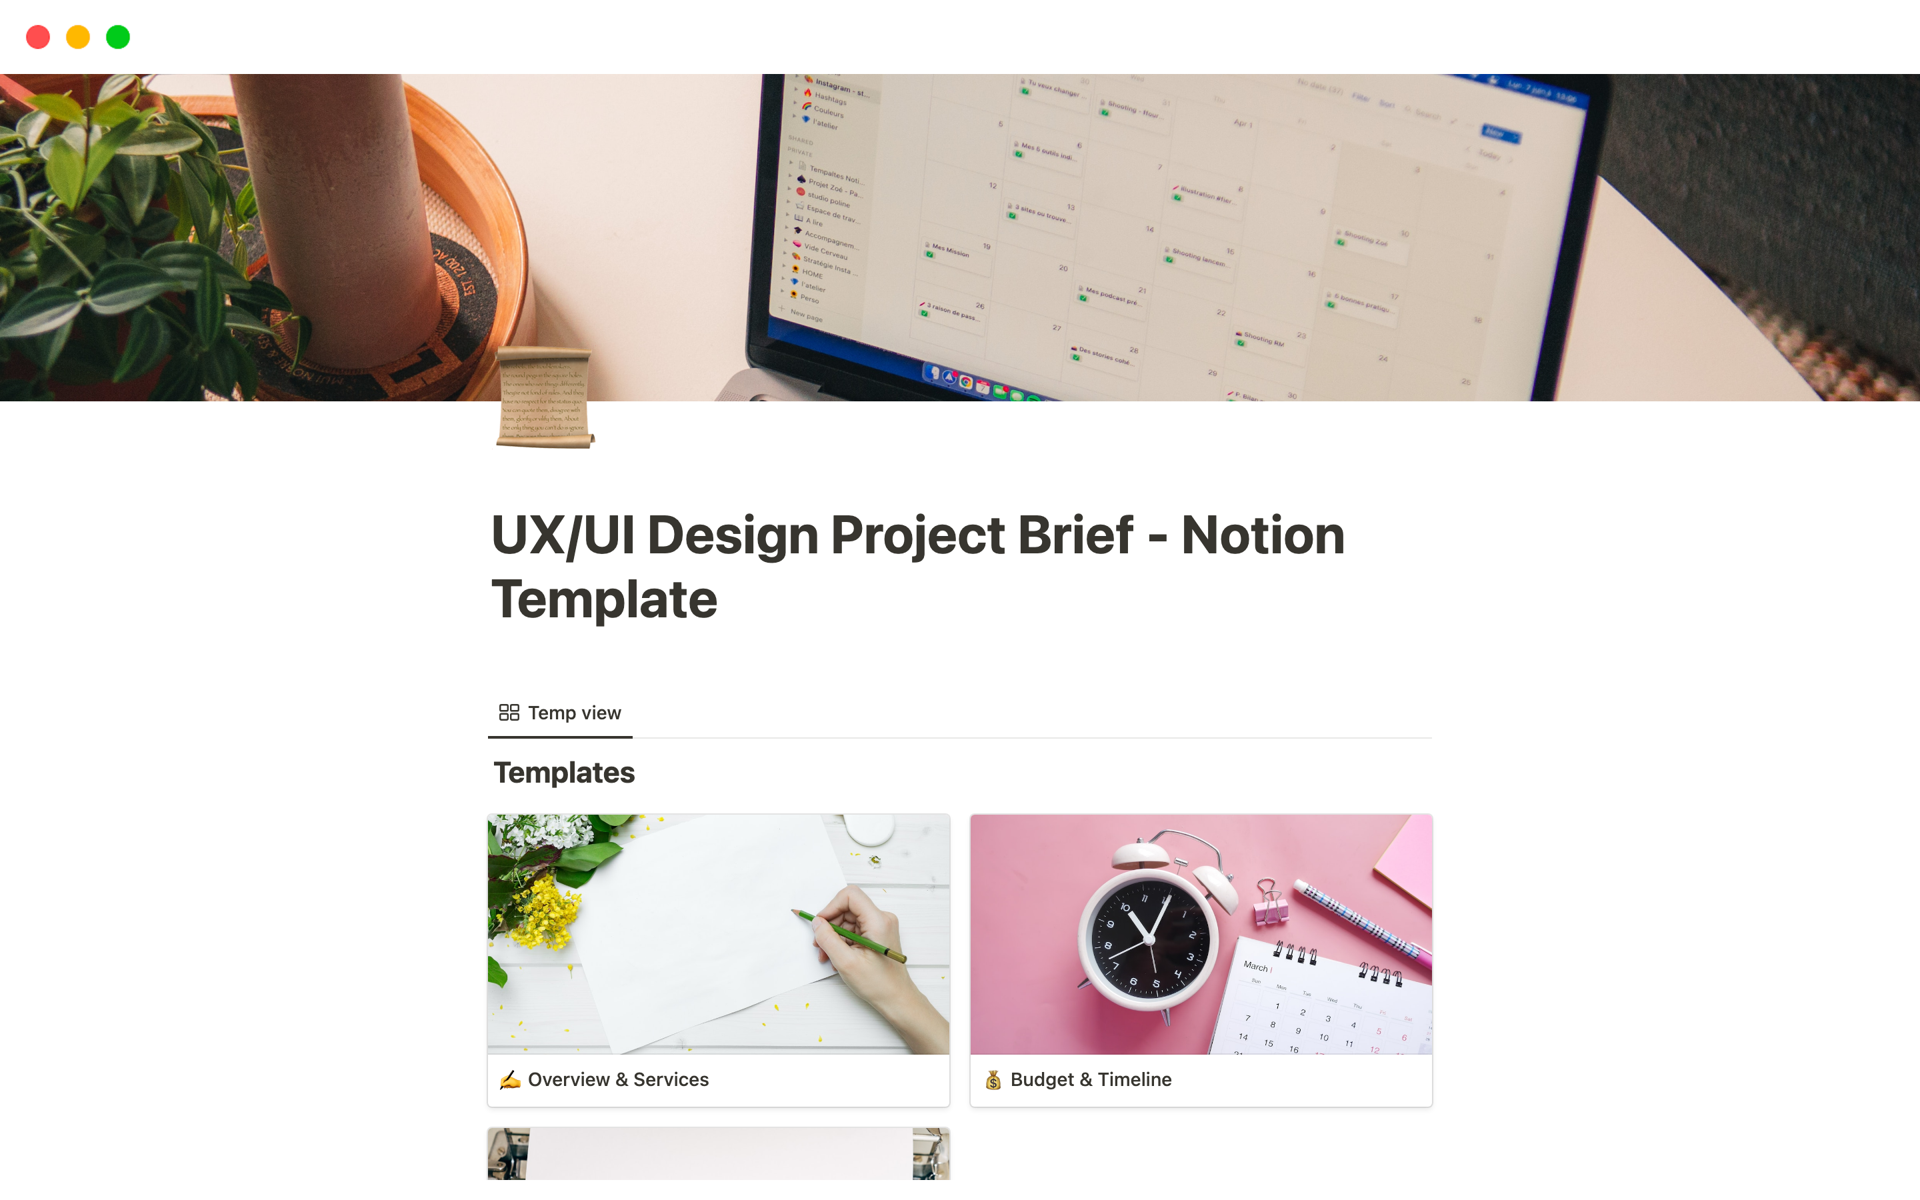 Discover a comprehensive UX/UI Design Project Brief template with an Overview, "Why me," Services, budget, timeline tables, and Terms and Conditions sections. Streamline your project management and showcase your qualifications. Get started on your design project today!